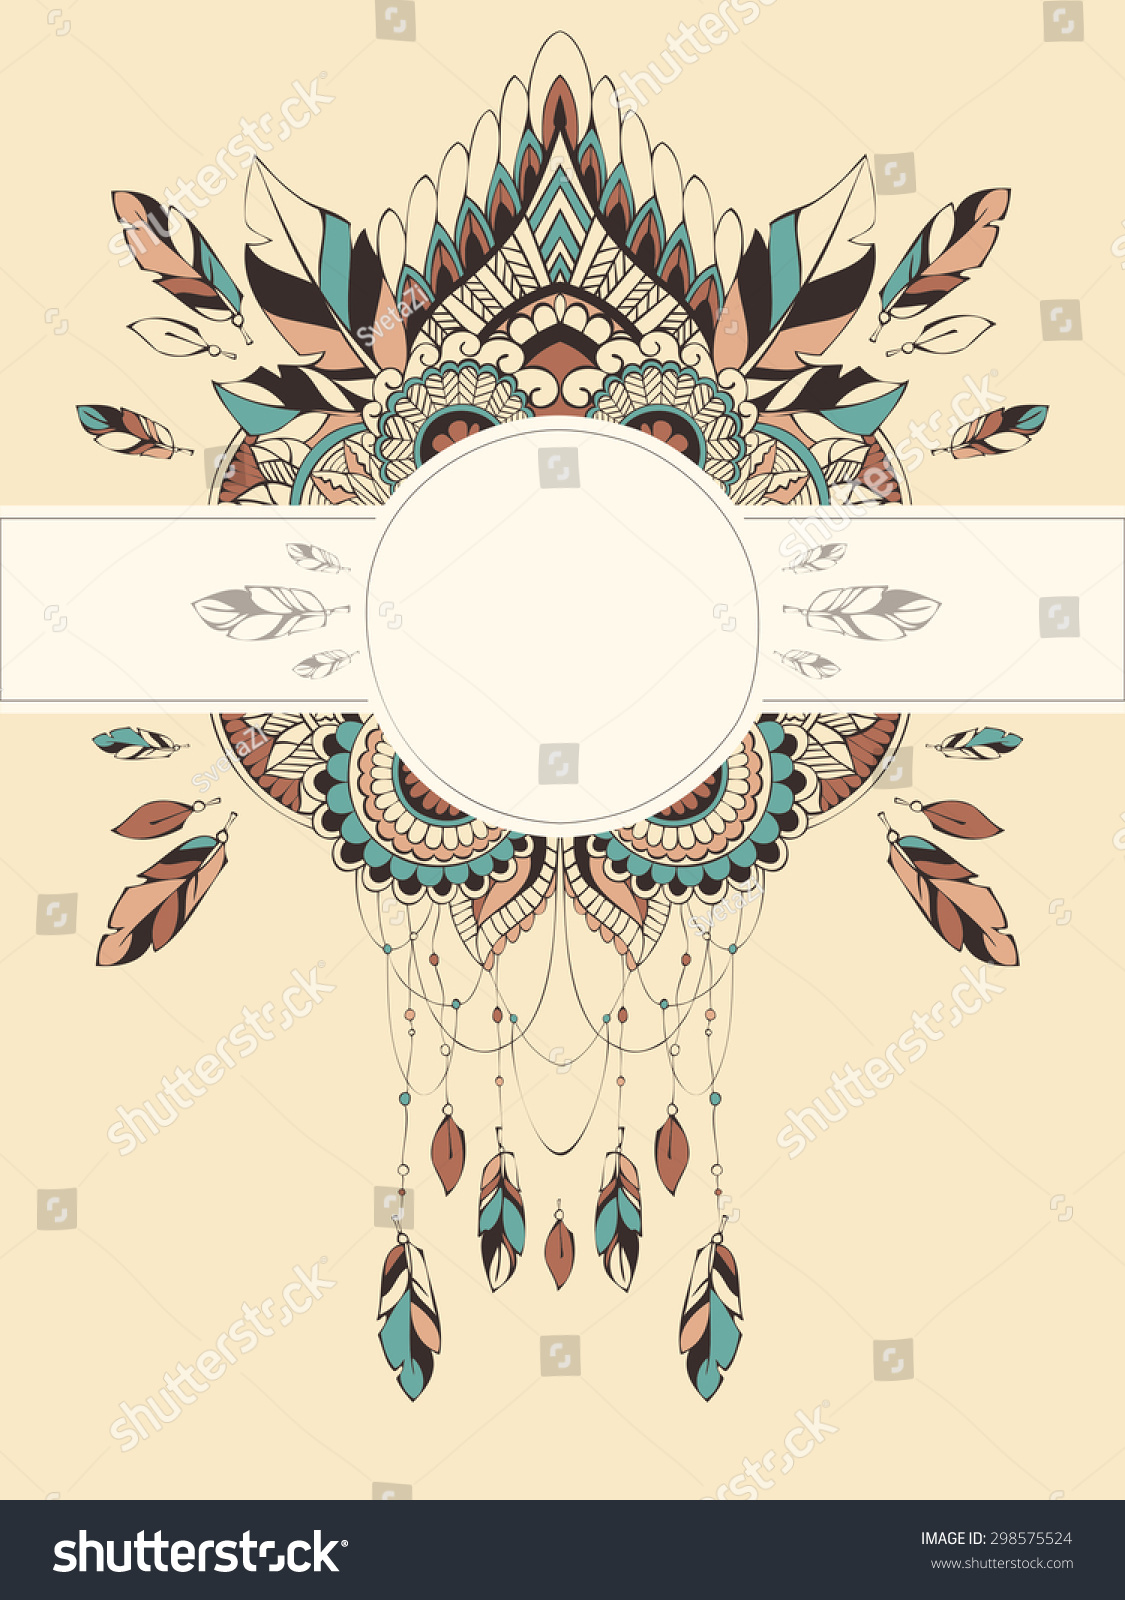 stock vector vector card templates in boho style for for special events can be used as invitations greeting 298575524